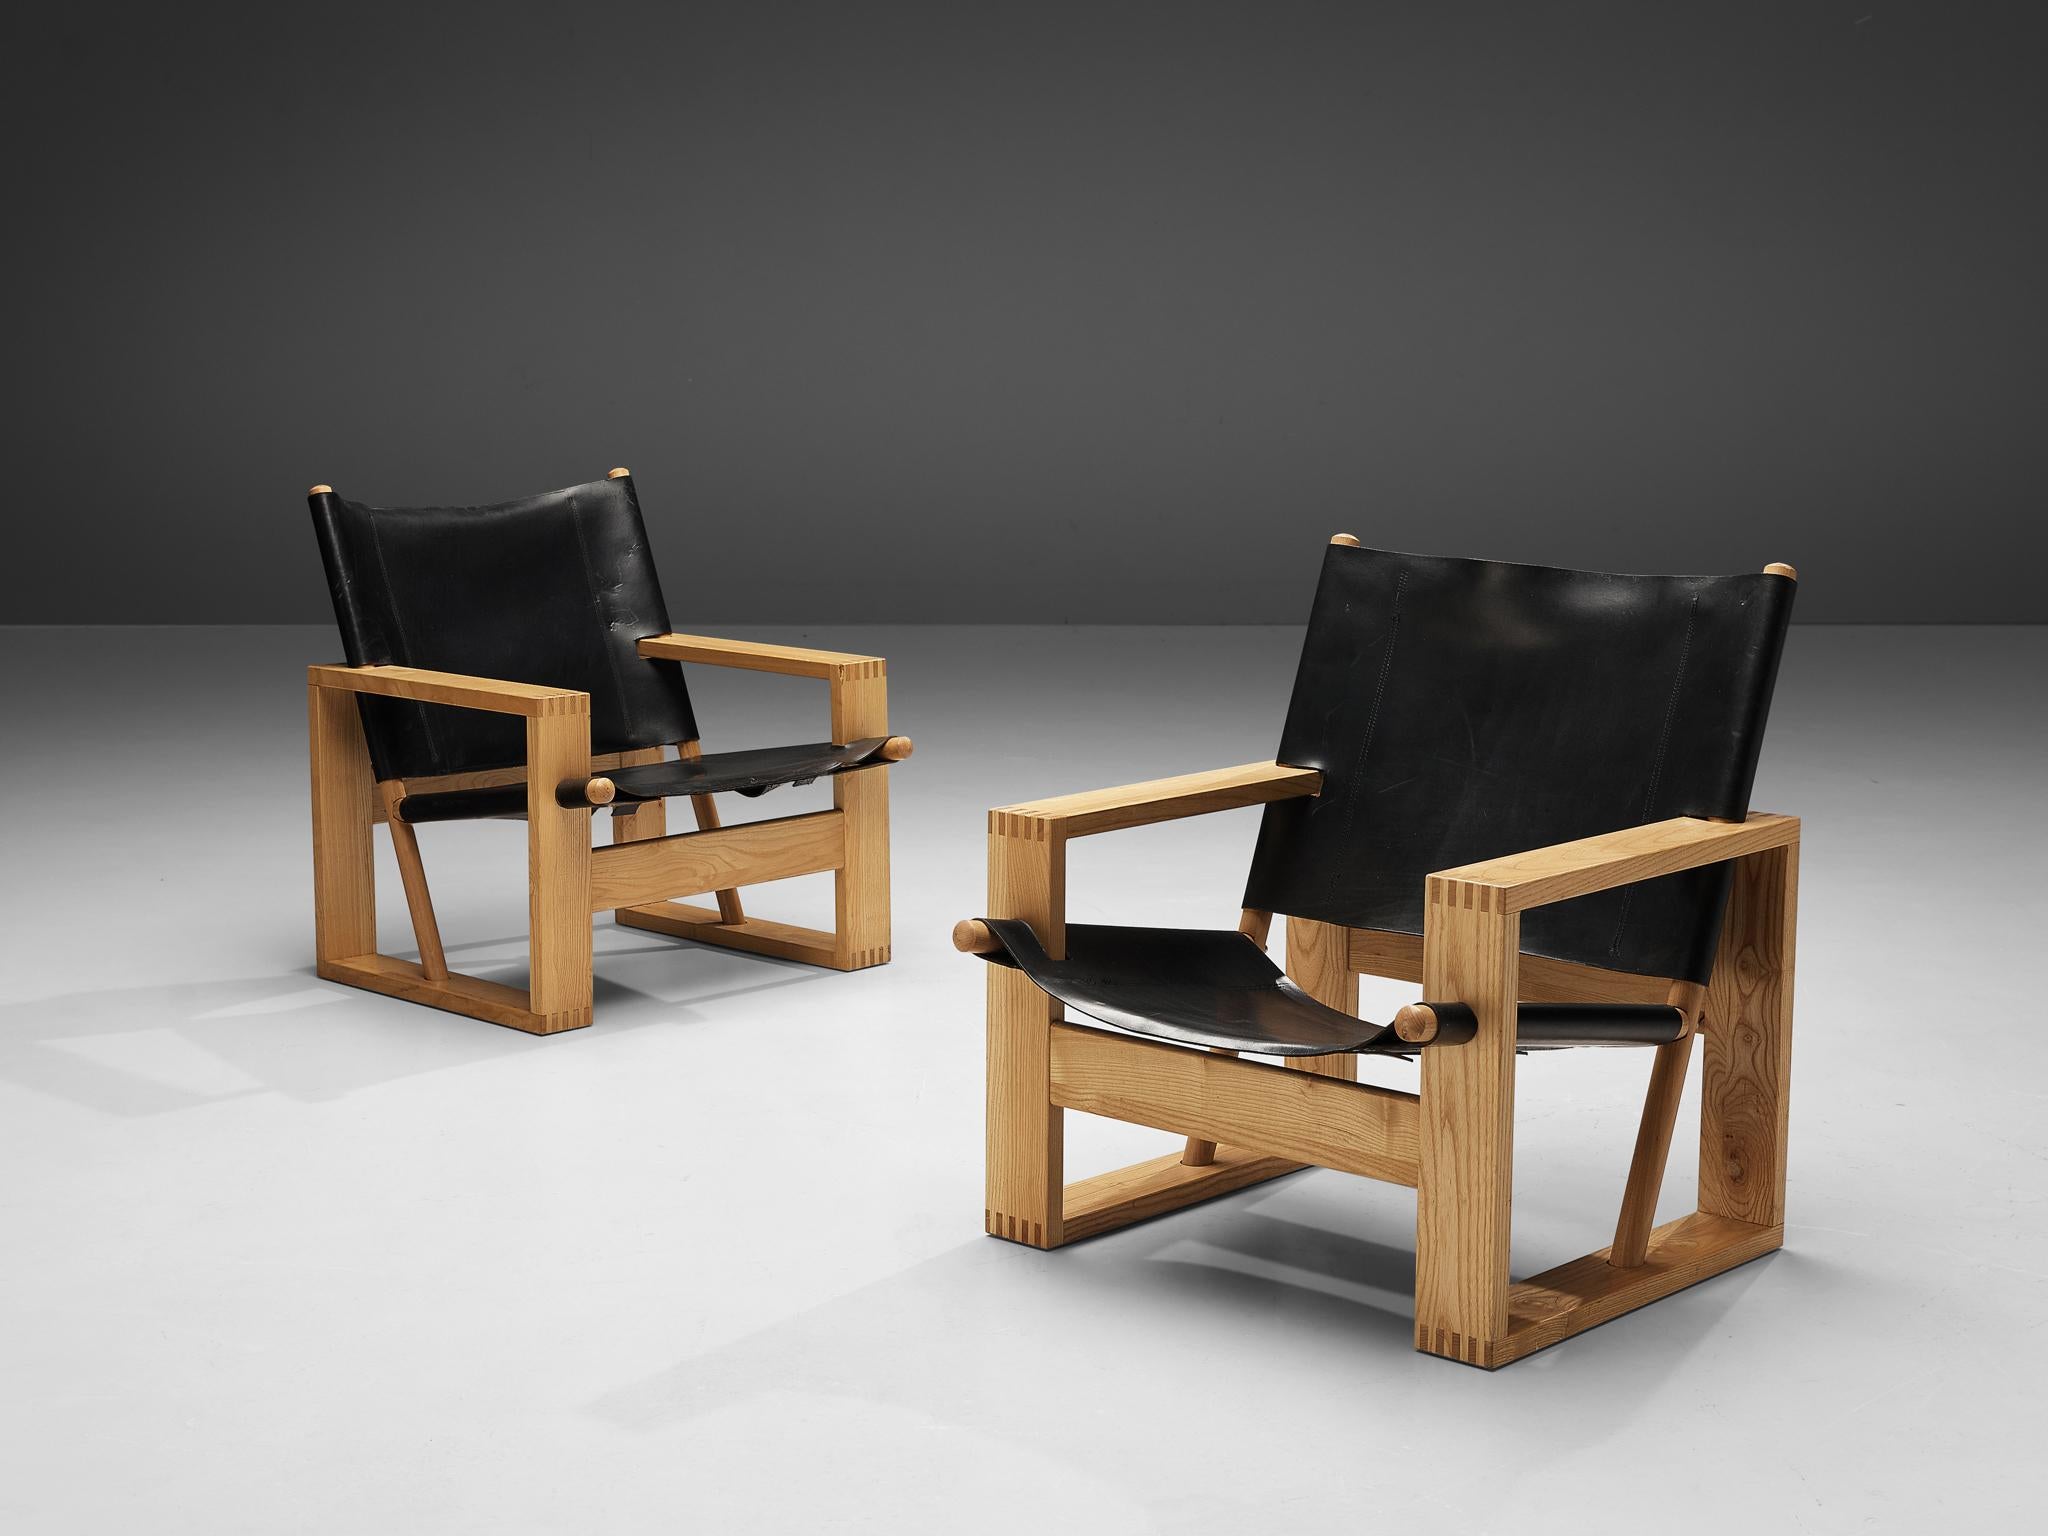 Ate van Apeldoorn for Houtwerk Hattem, lounge chairs, ash, leather, The Netherlands, 1960s

The founder of Houtwerk Hattem, Ate van Apeldoorn, designed this lounge chair in the early 1960s. It features high-quality craftsmanship that can be seen in